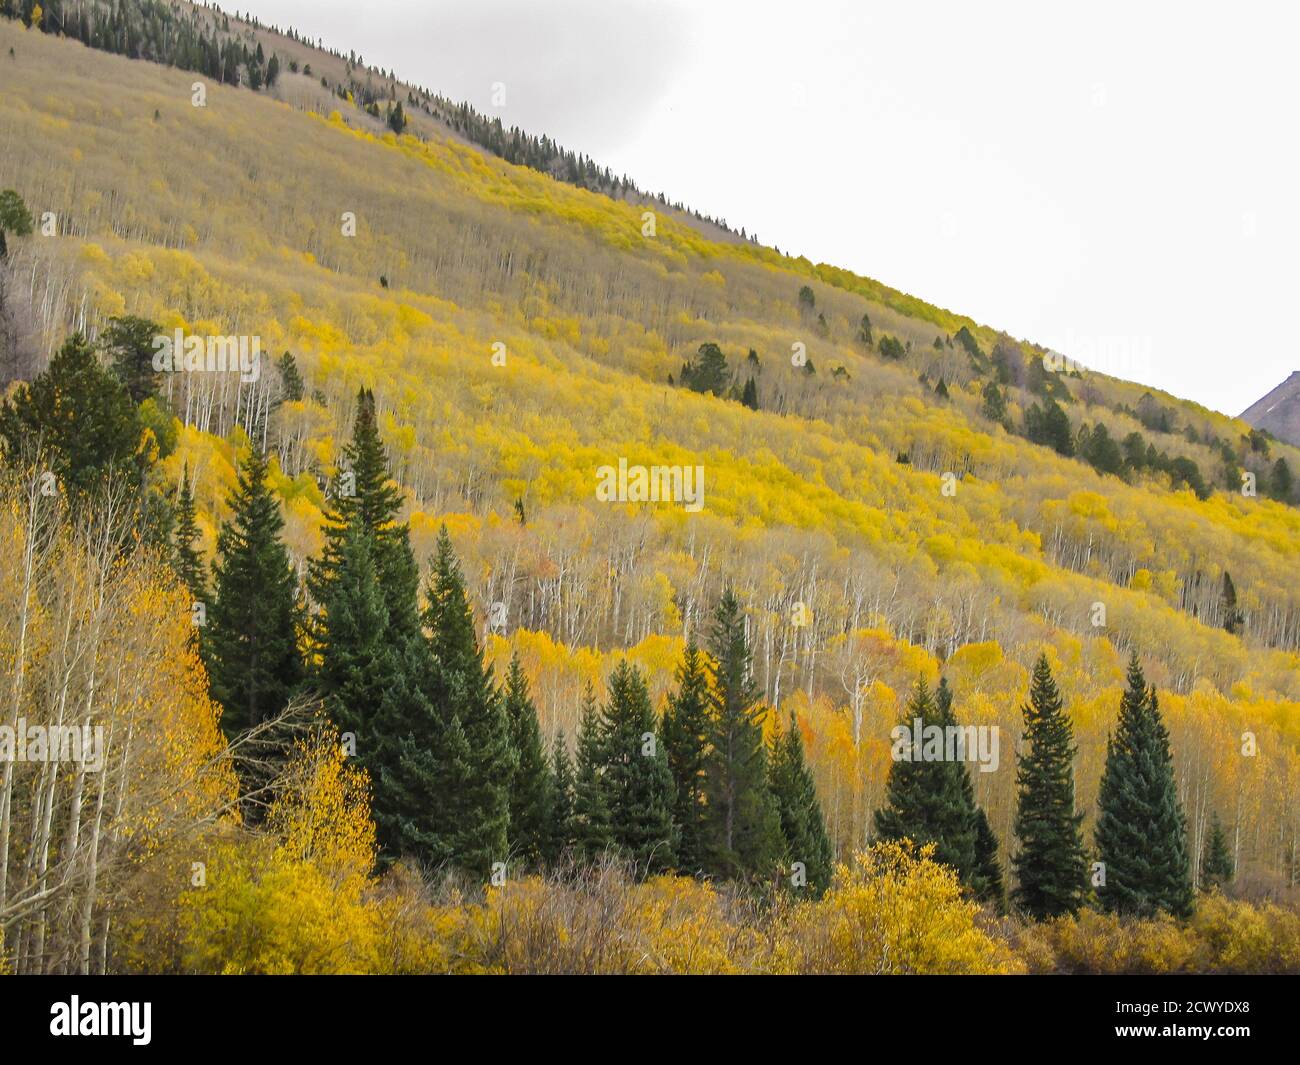 The slopes of the La Sal Mountains of Utah, USA, covered in fall forests of yellow colored quaking aspen, and evergreen, Douglas-firs, Stock Photo